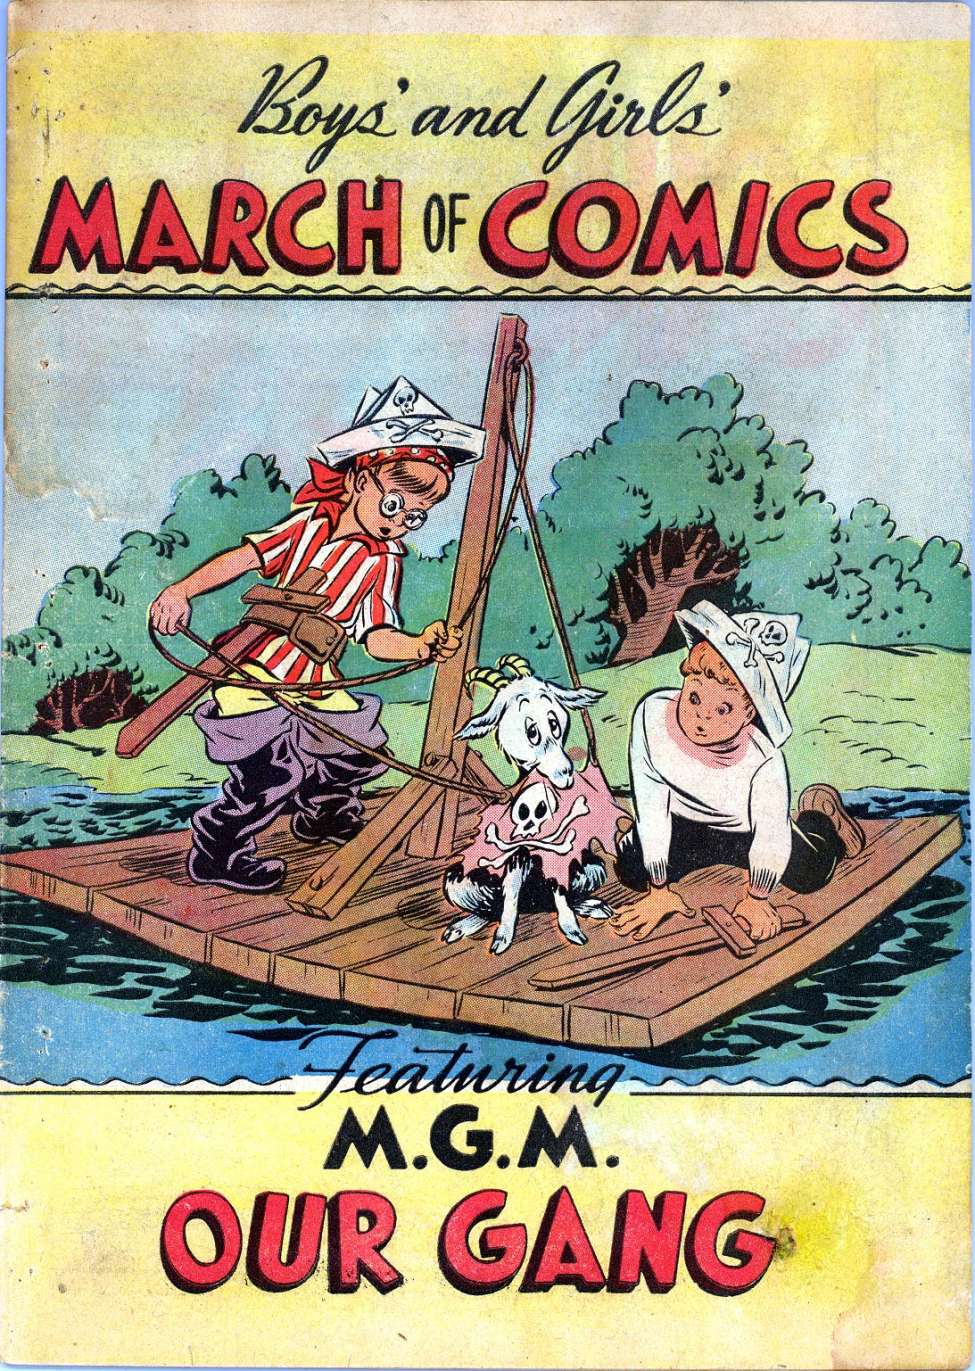 Book Cover For March of Comics 26 - Featuring M.G.M Our Gang